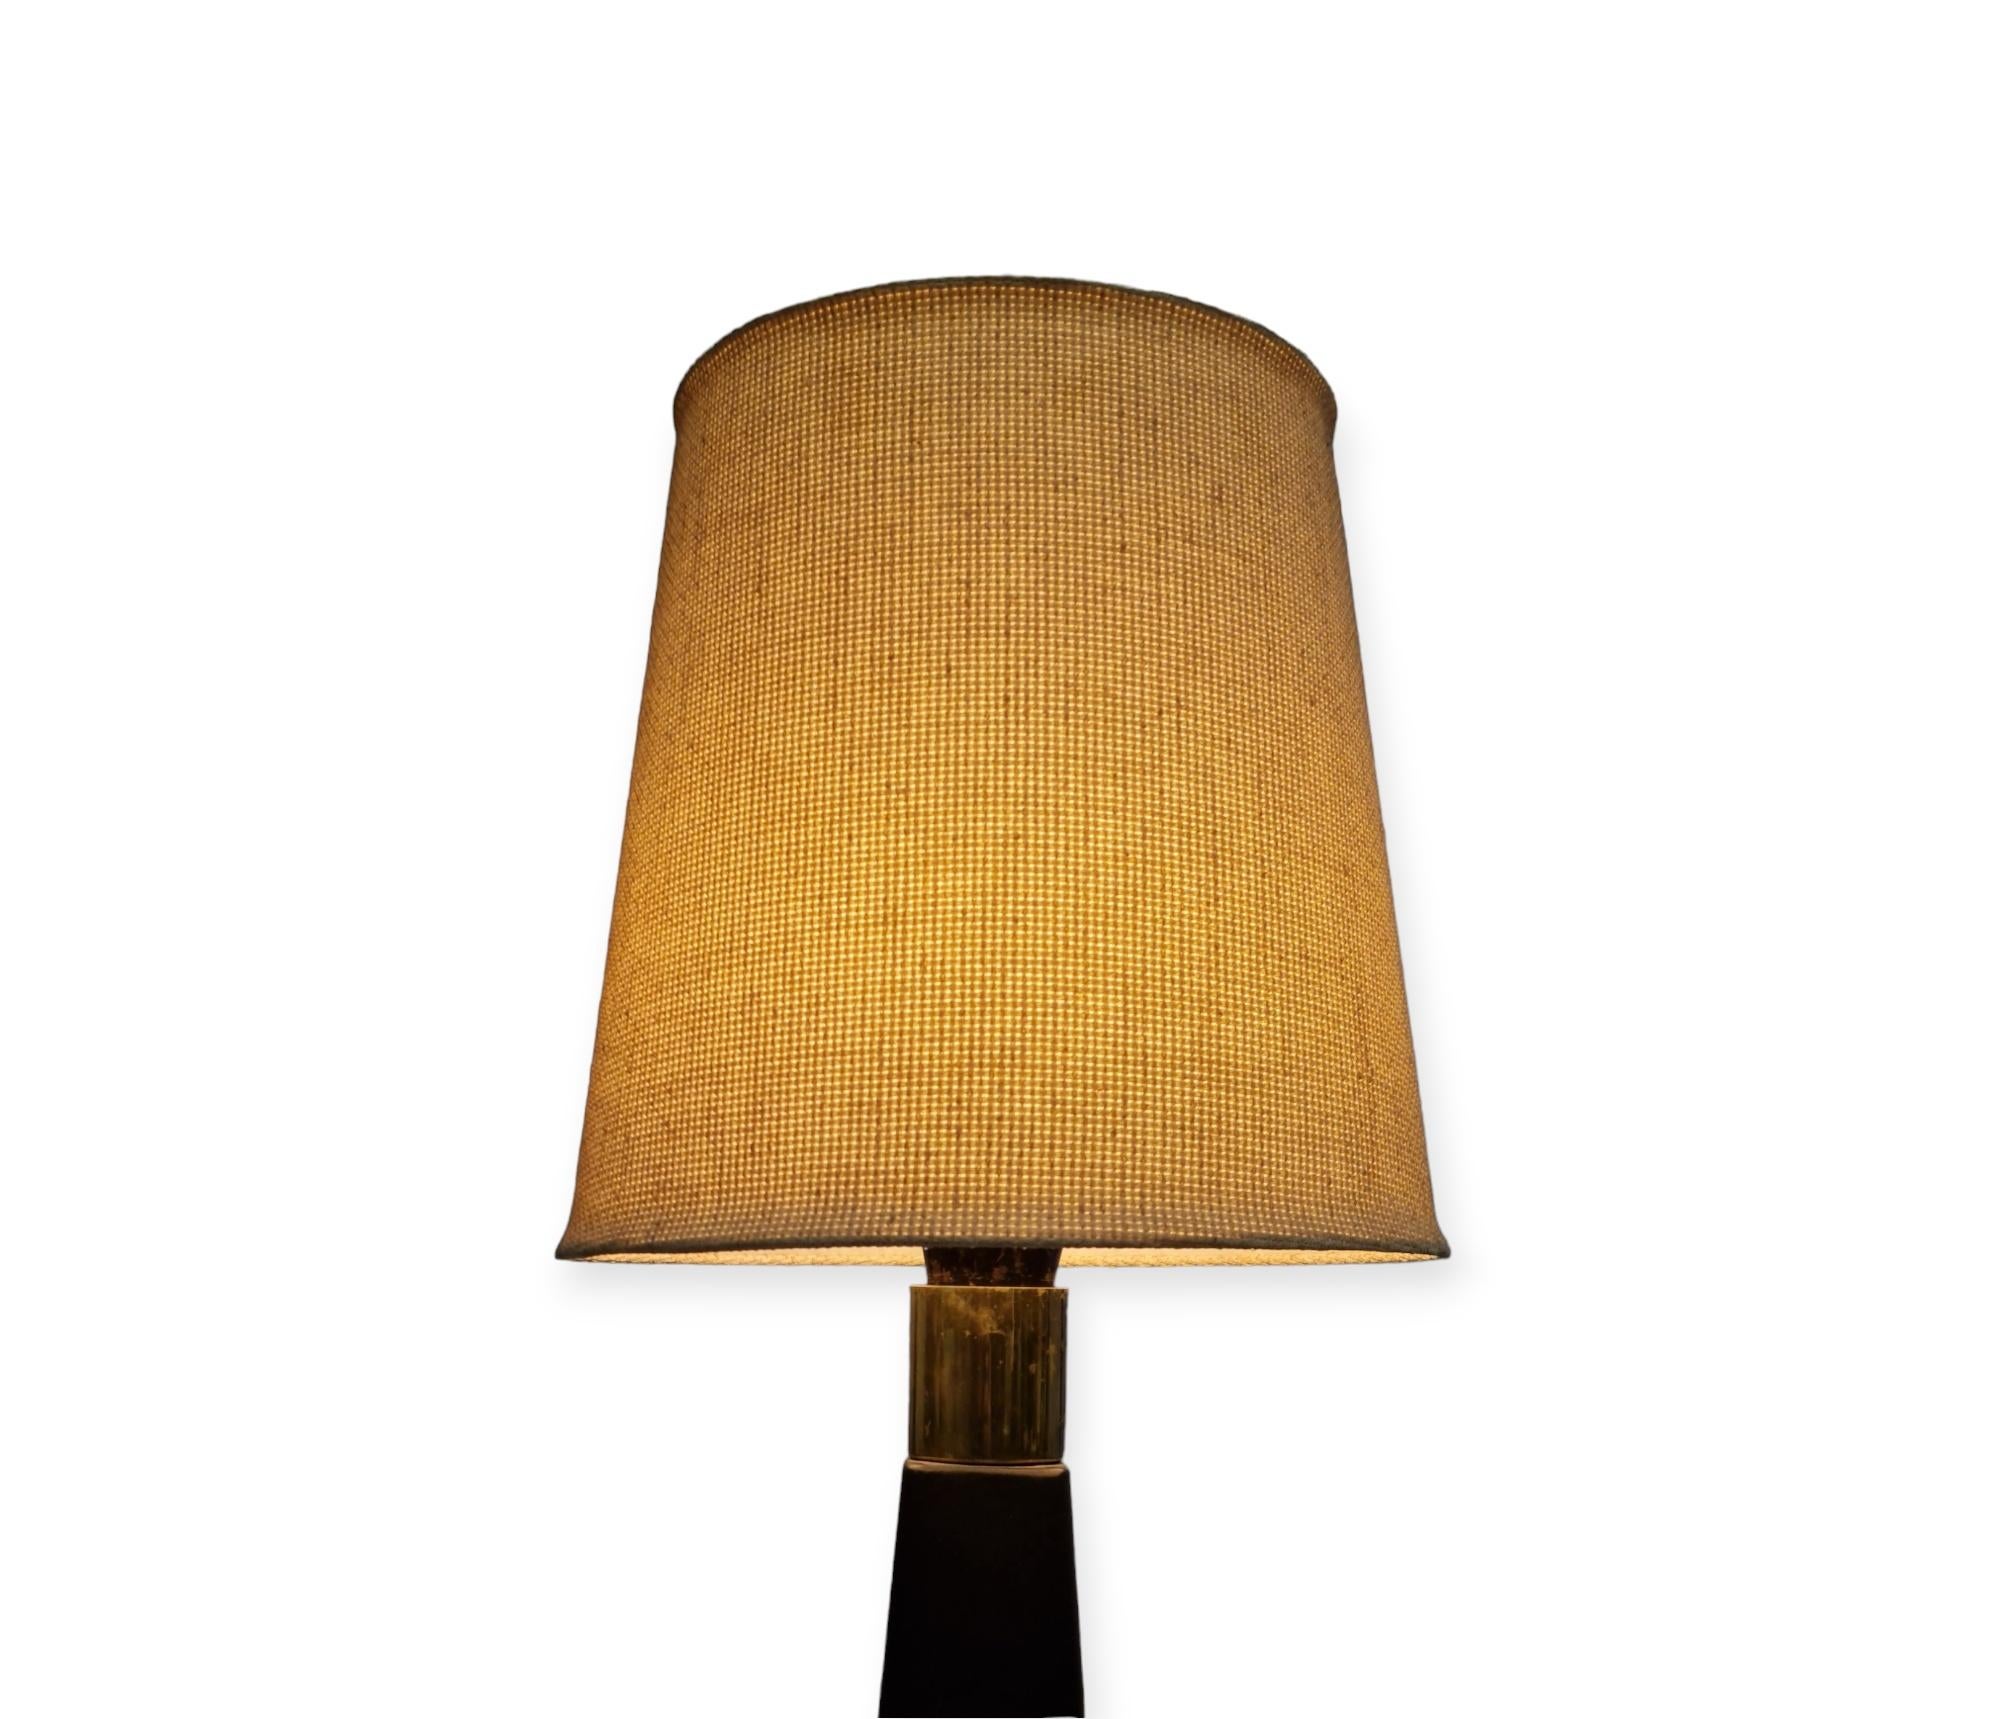 Brass Lisa Johansson-Papé Table Lamp 46-186 LJP in Leather and Linen, Orno For Sale